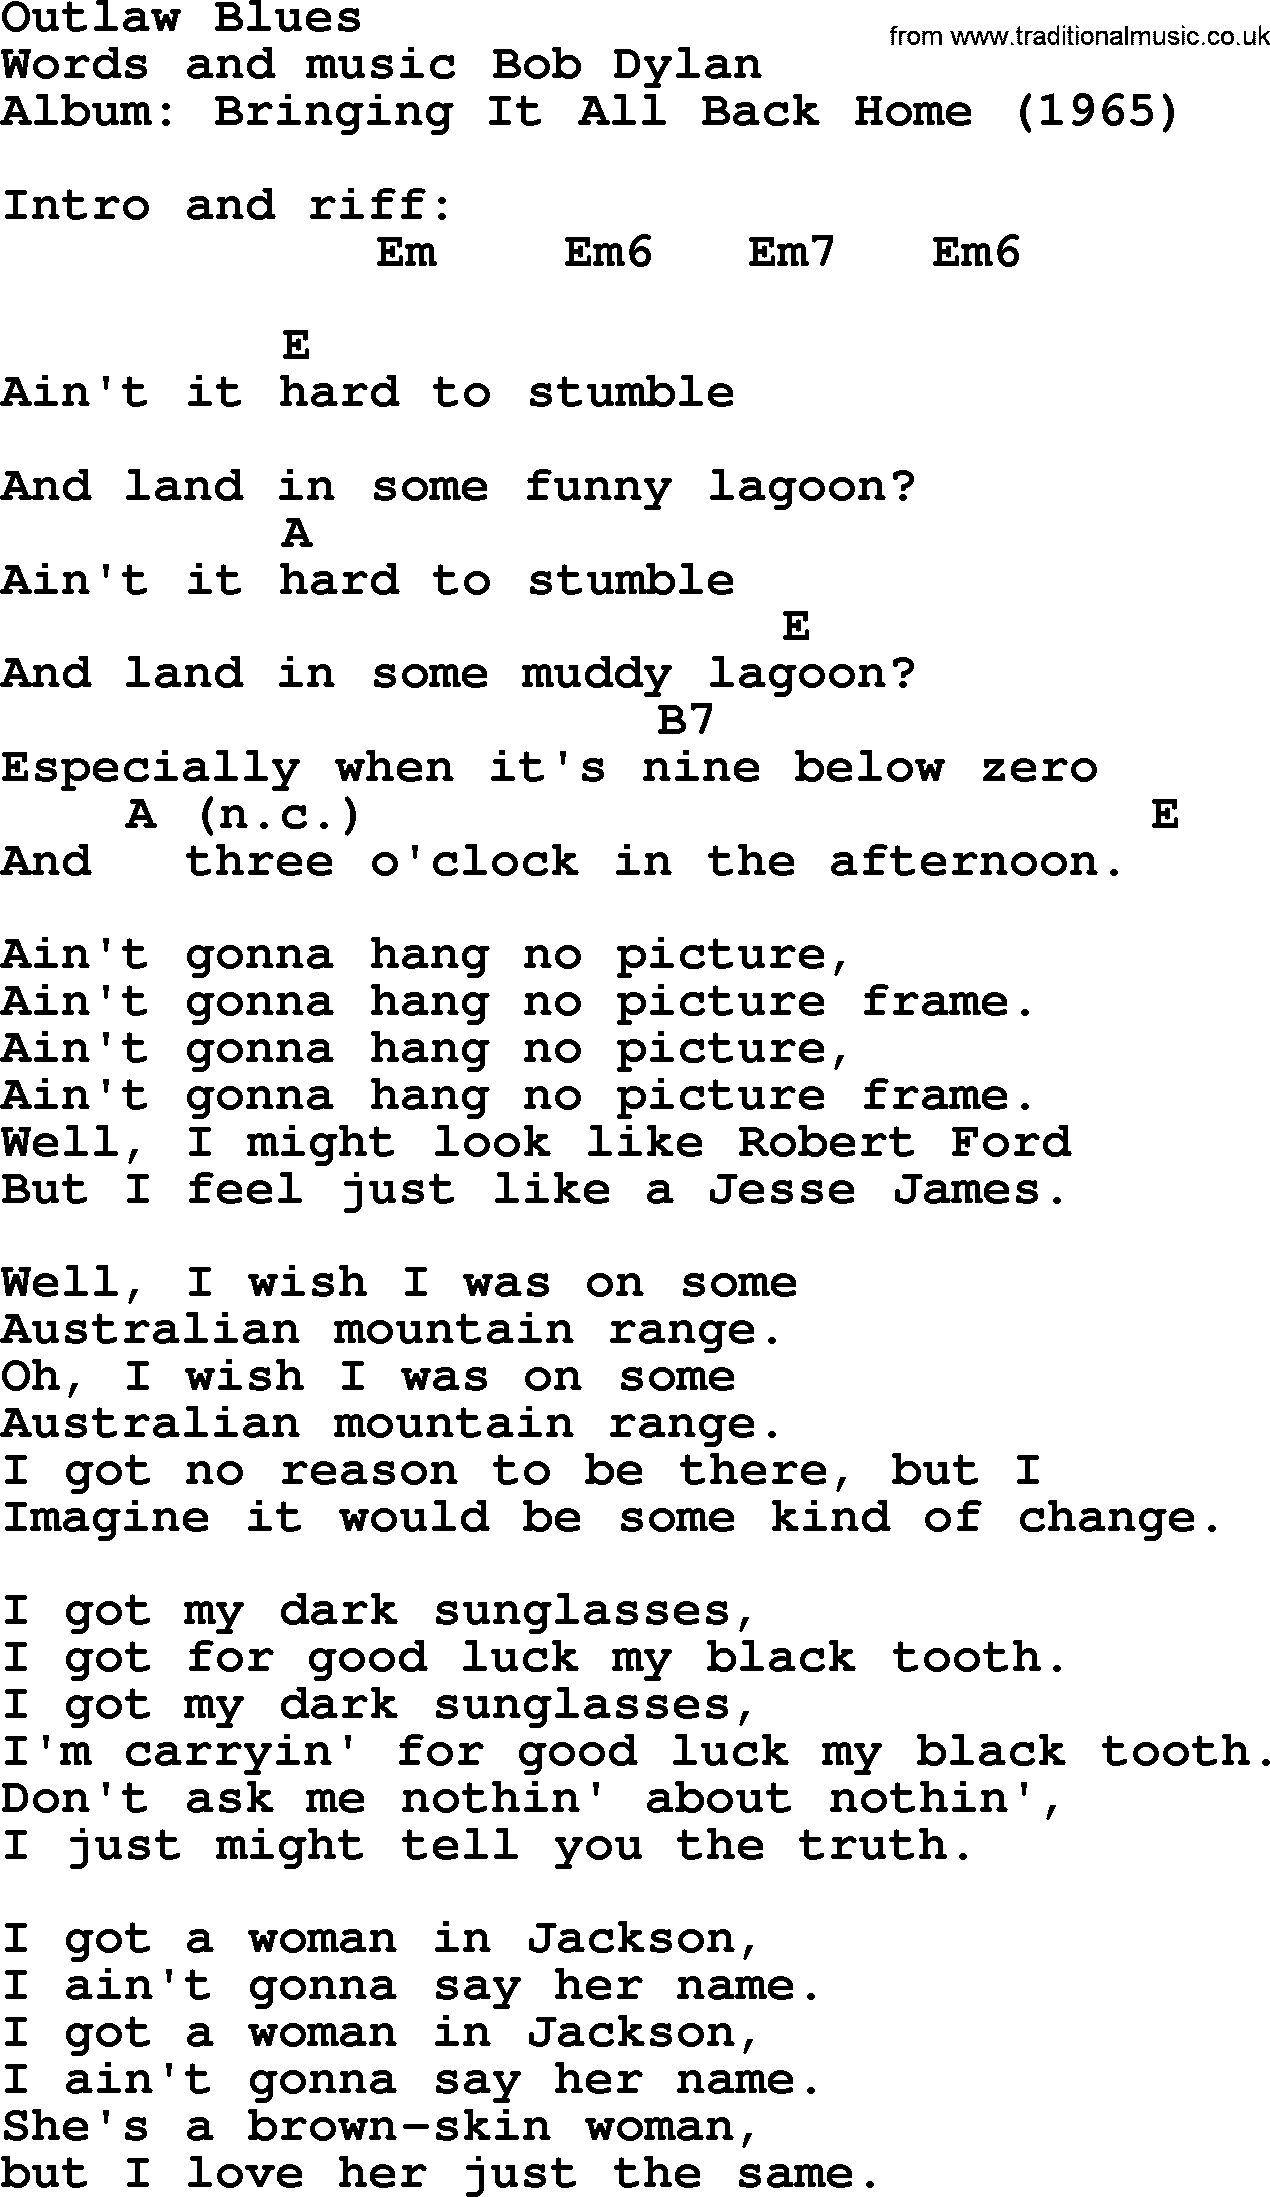 Bob Dylan song, lyrics with chords - Outlaw Blues